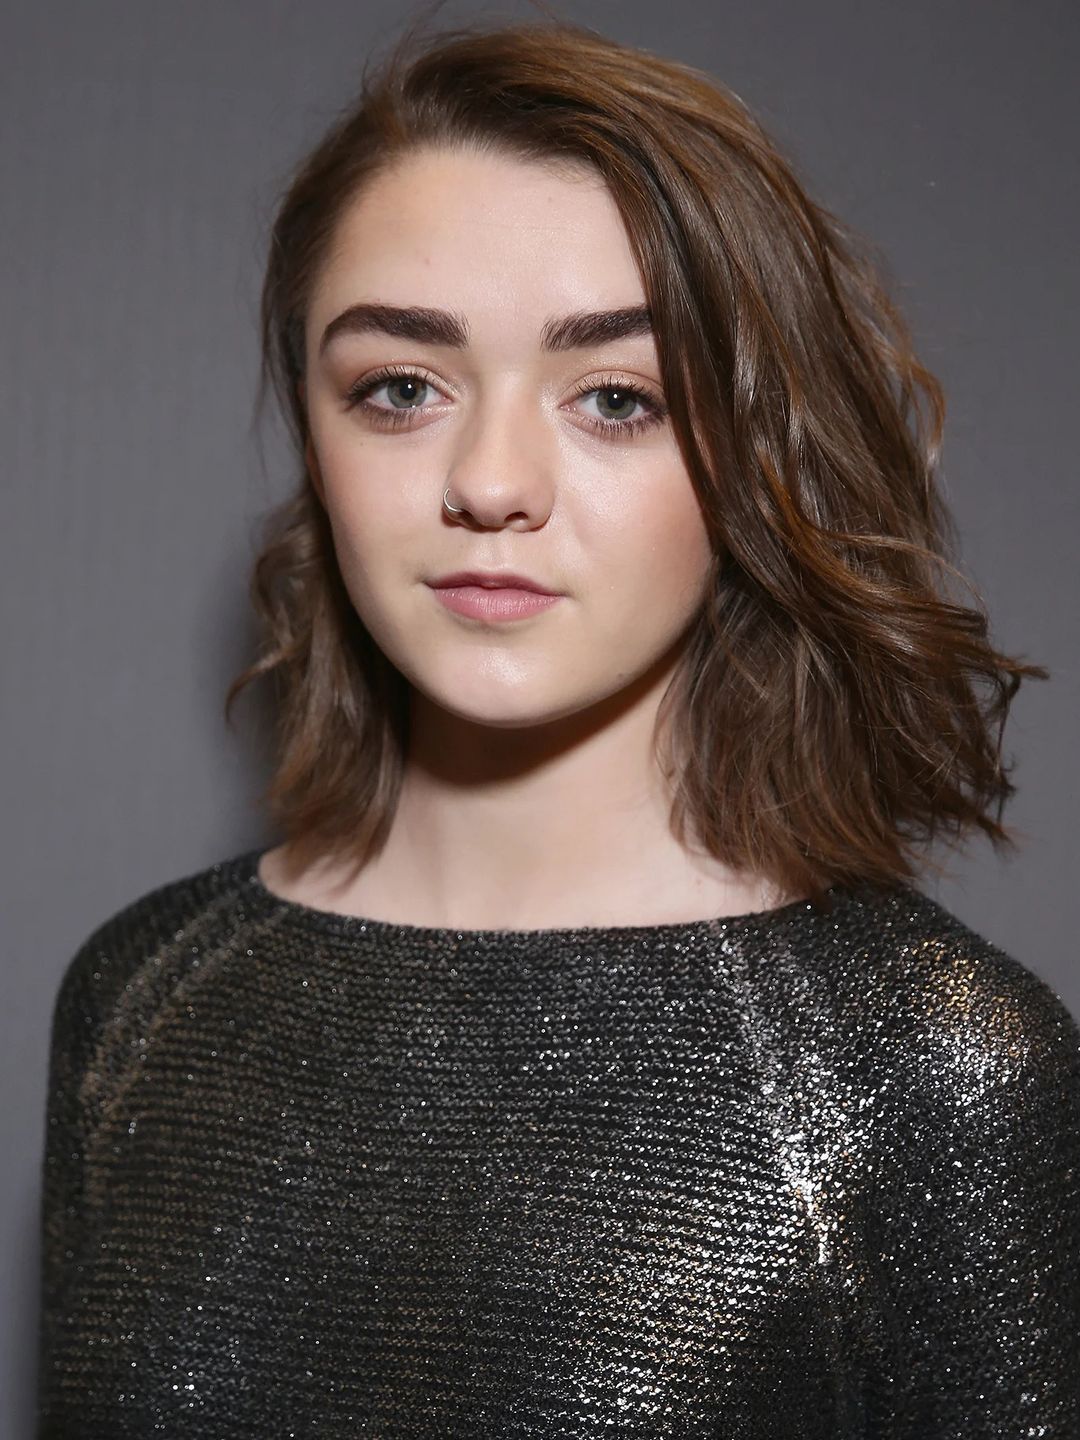 Maisie Williams where does she live